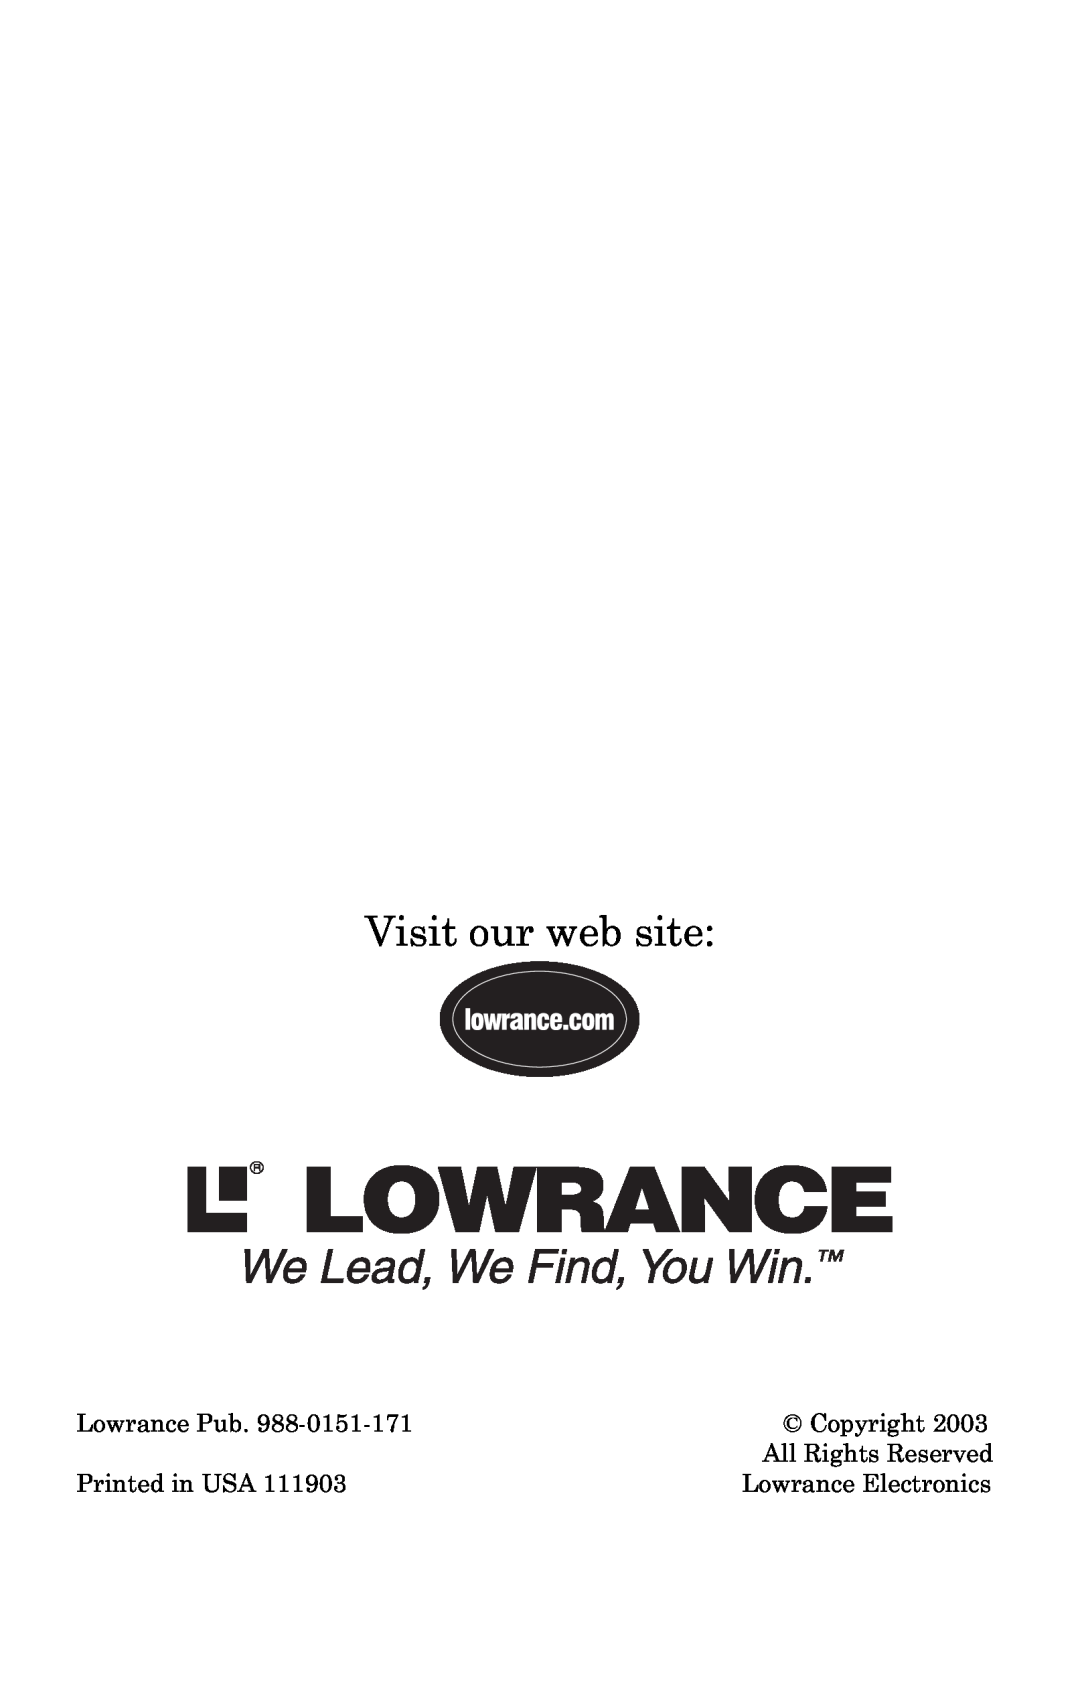 Lowrance electronic X135, X136DF, X125 Visit our web site, Lowrance Pub, Copyright, All Rights Reserved, Printed in USA 